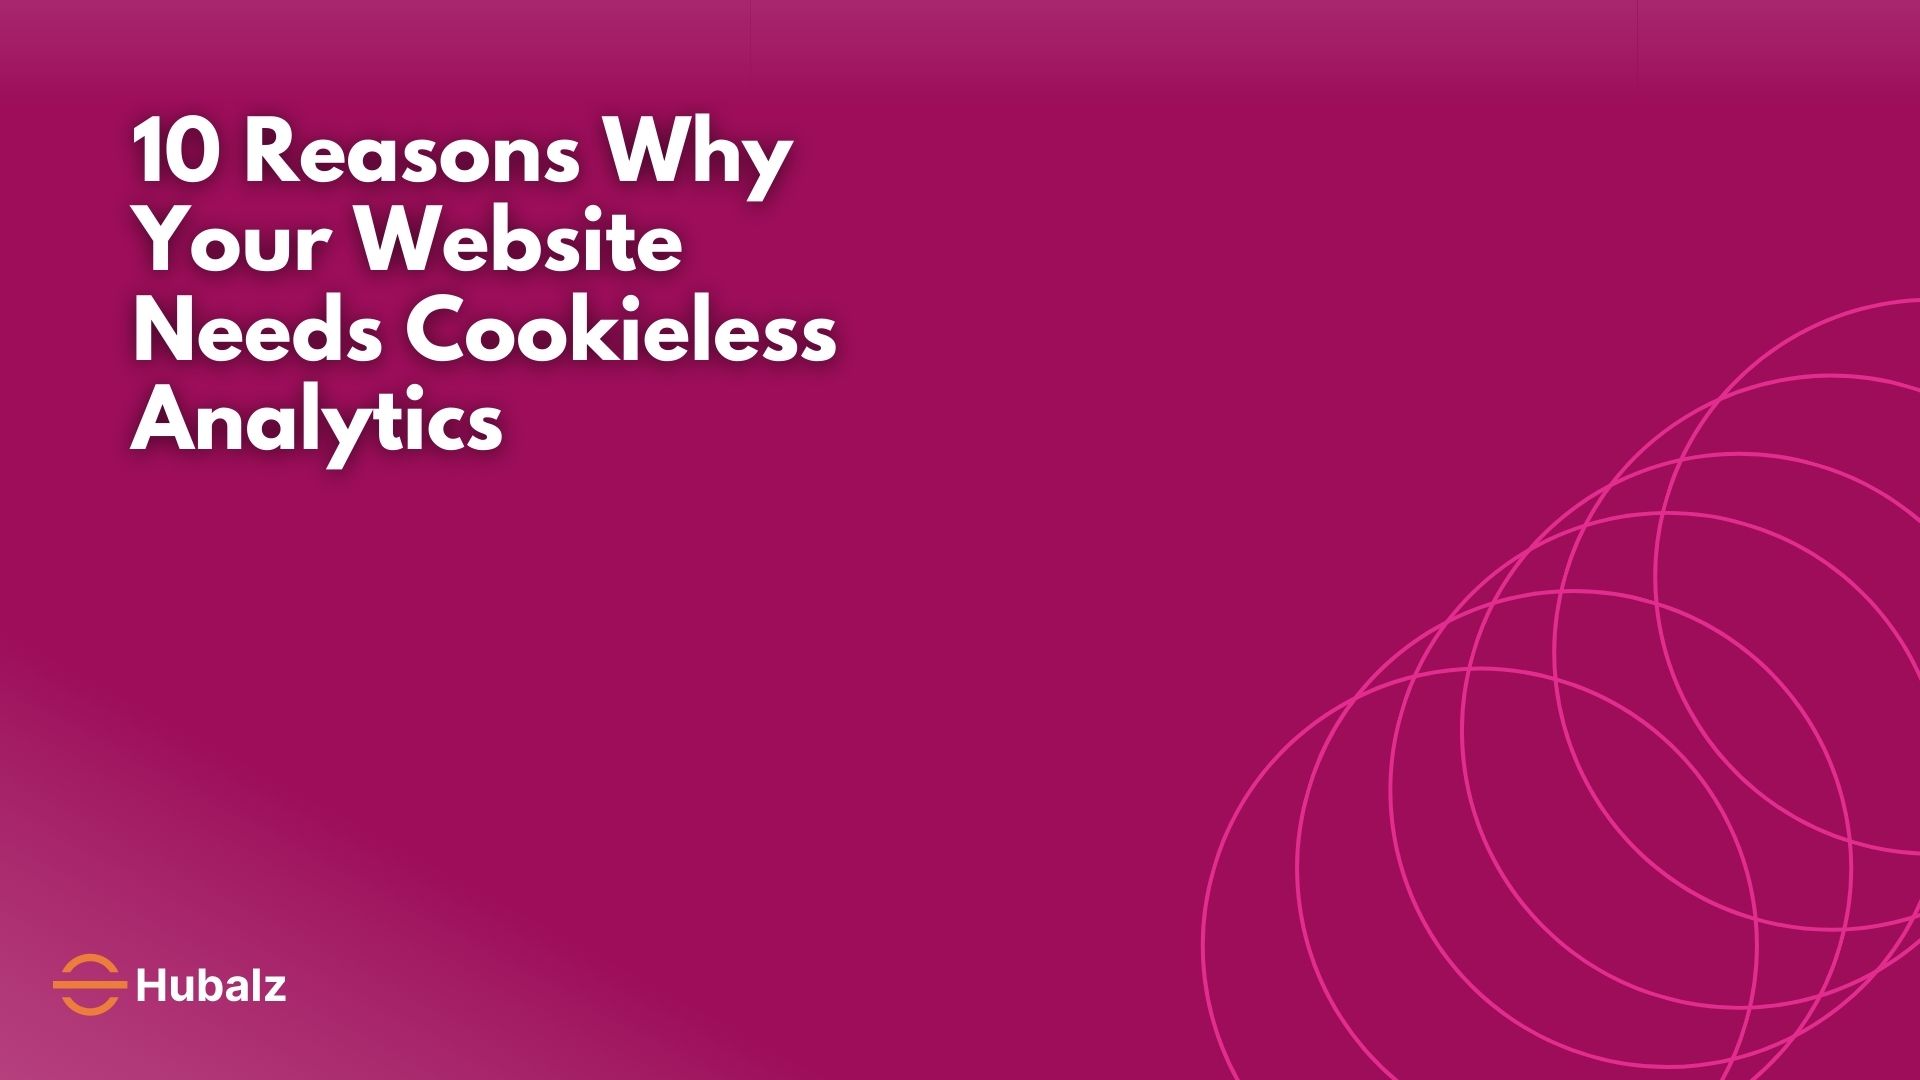 10 Reasons Why Your Website Needs Cookieless Analytics